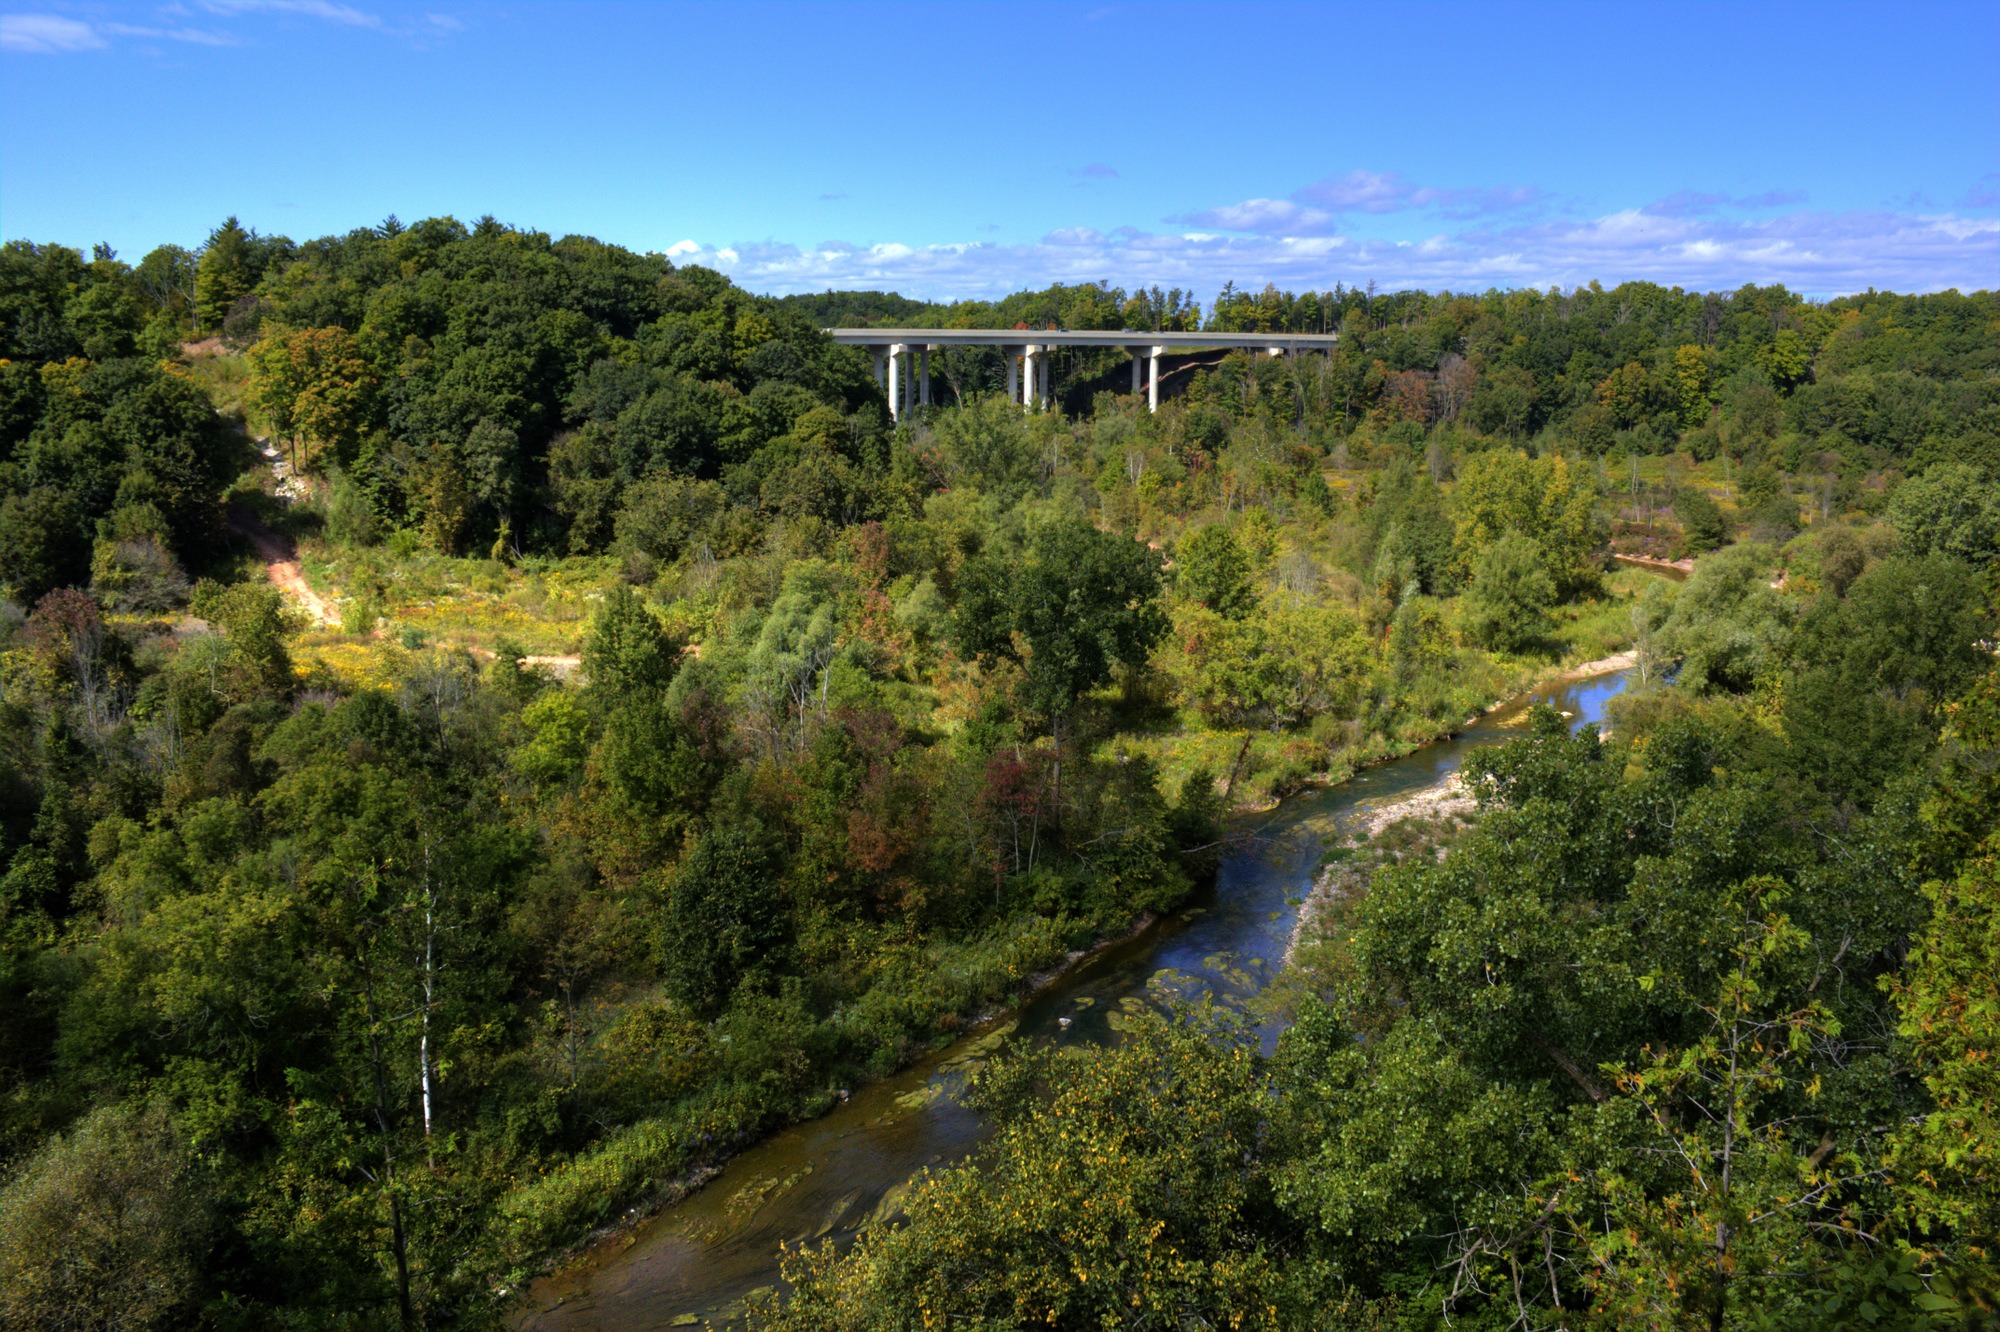 A stream, surrounded by trees, with a highway overpass cutting through the landscape in the distance.